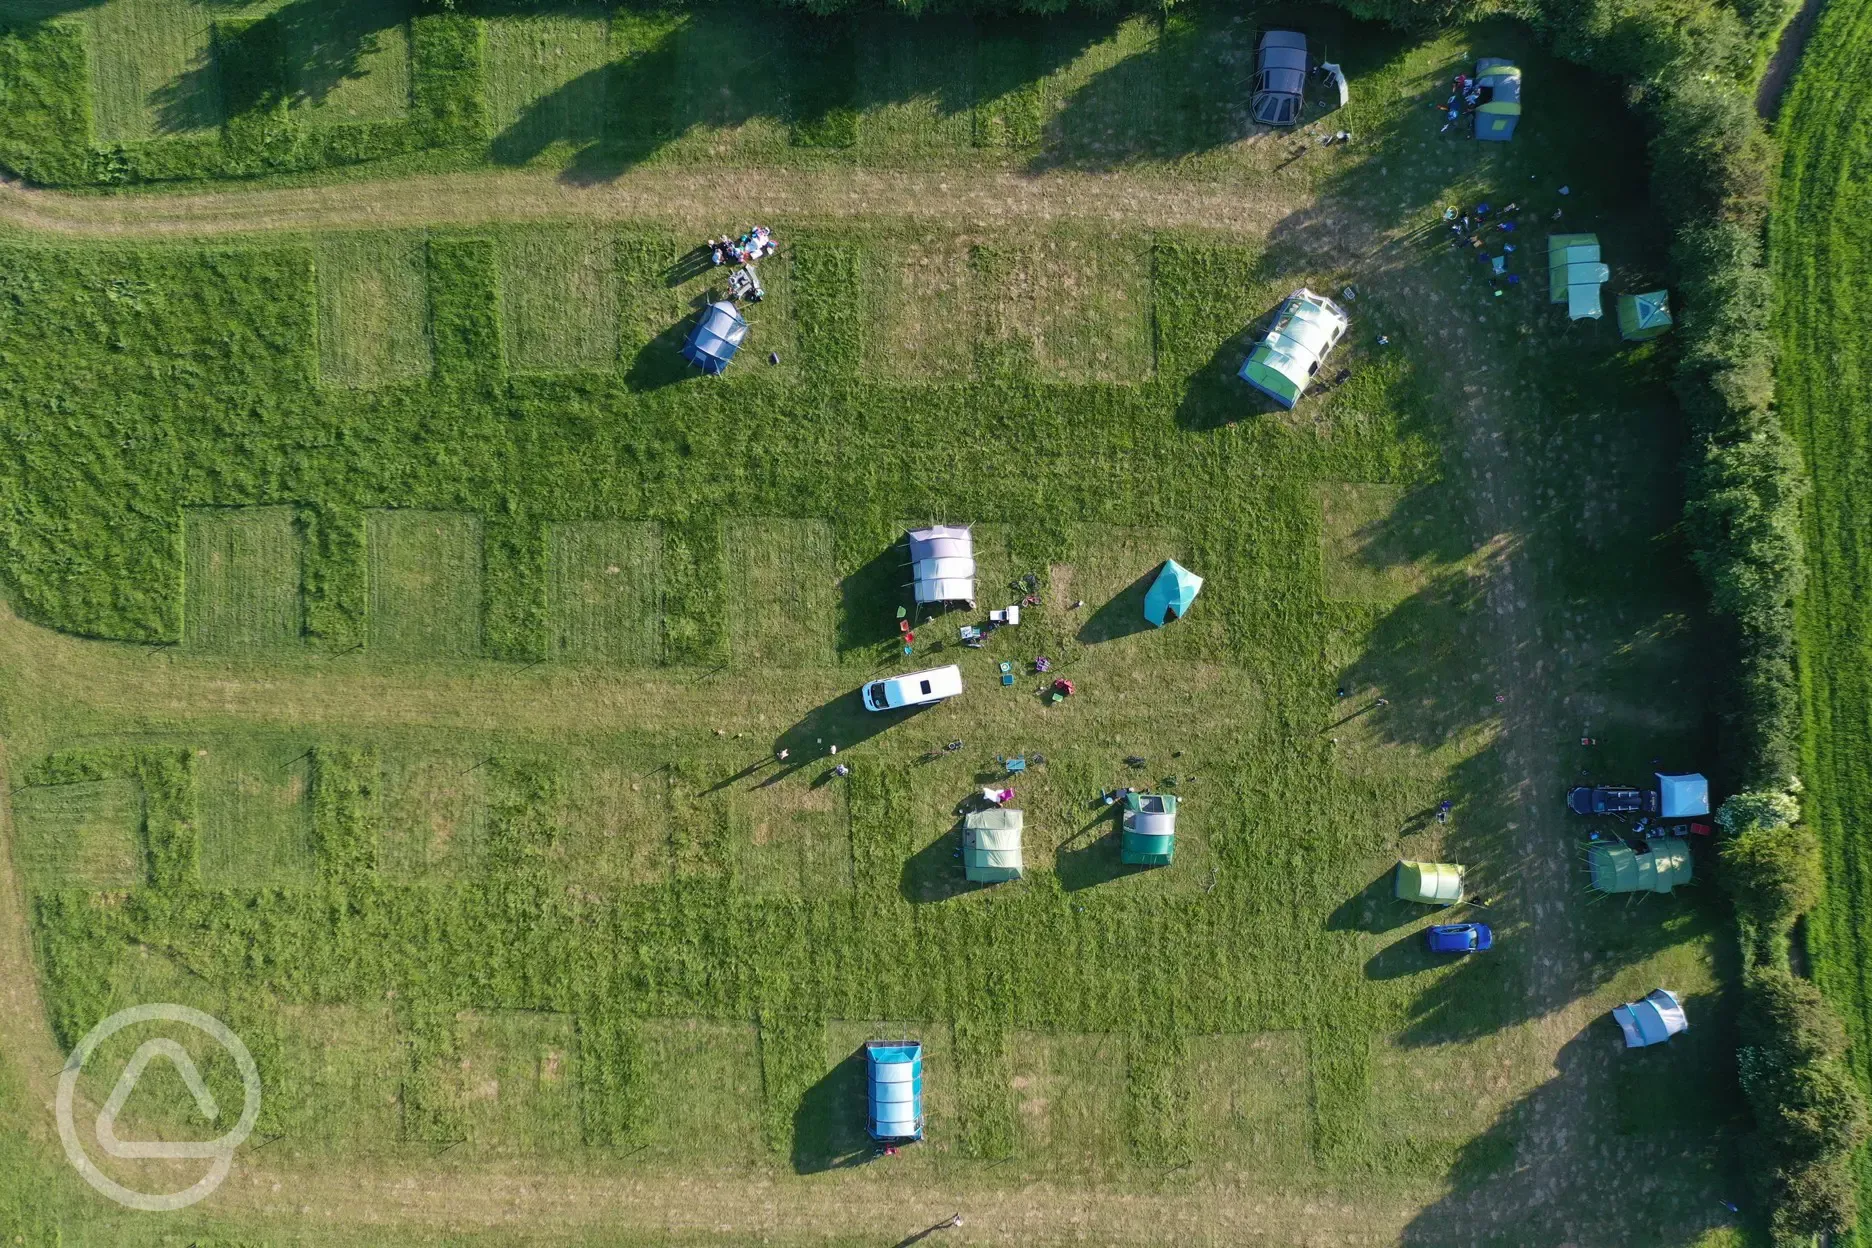 Bird's eye view of the non electric grass pitches